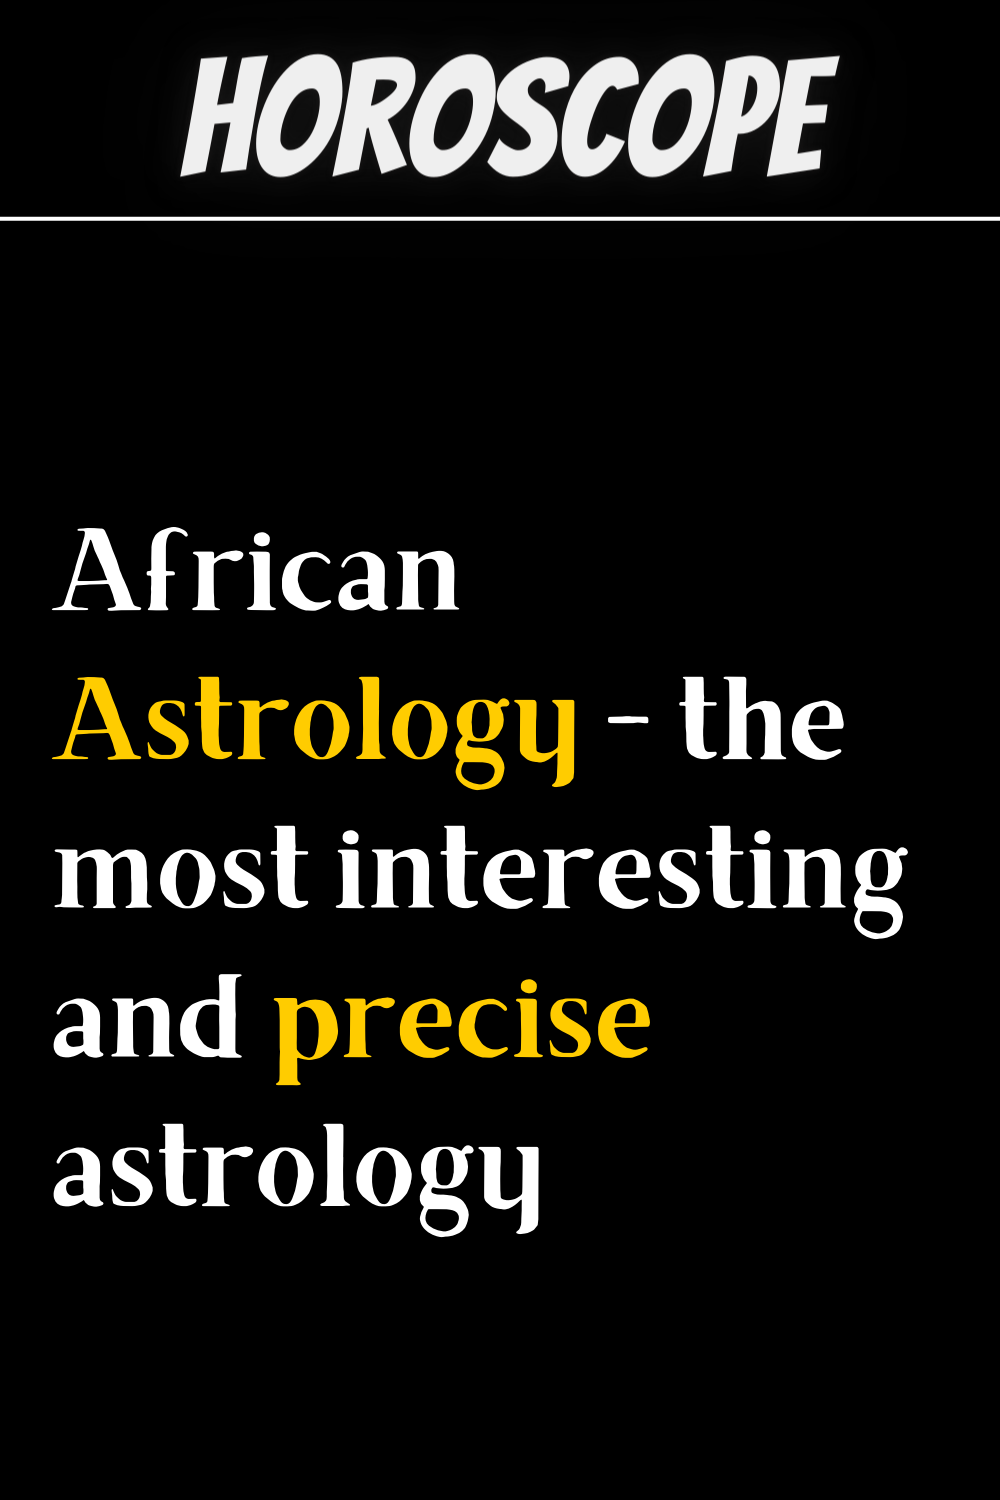 African Astrology the most interesting and precise astrology